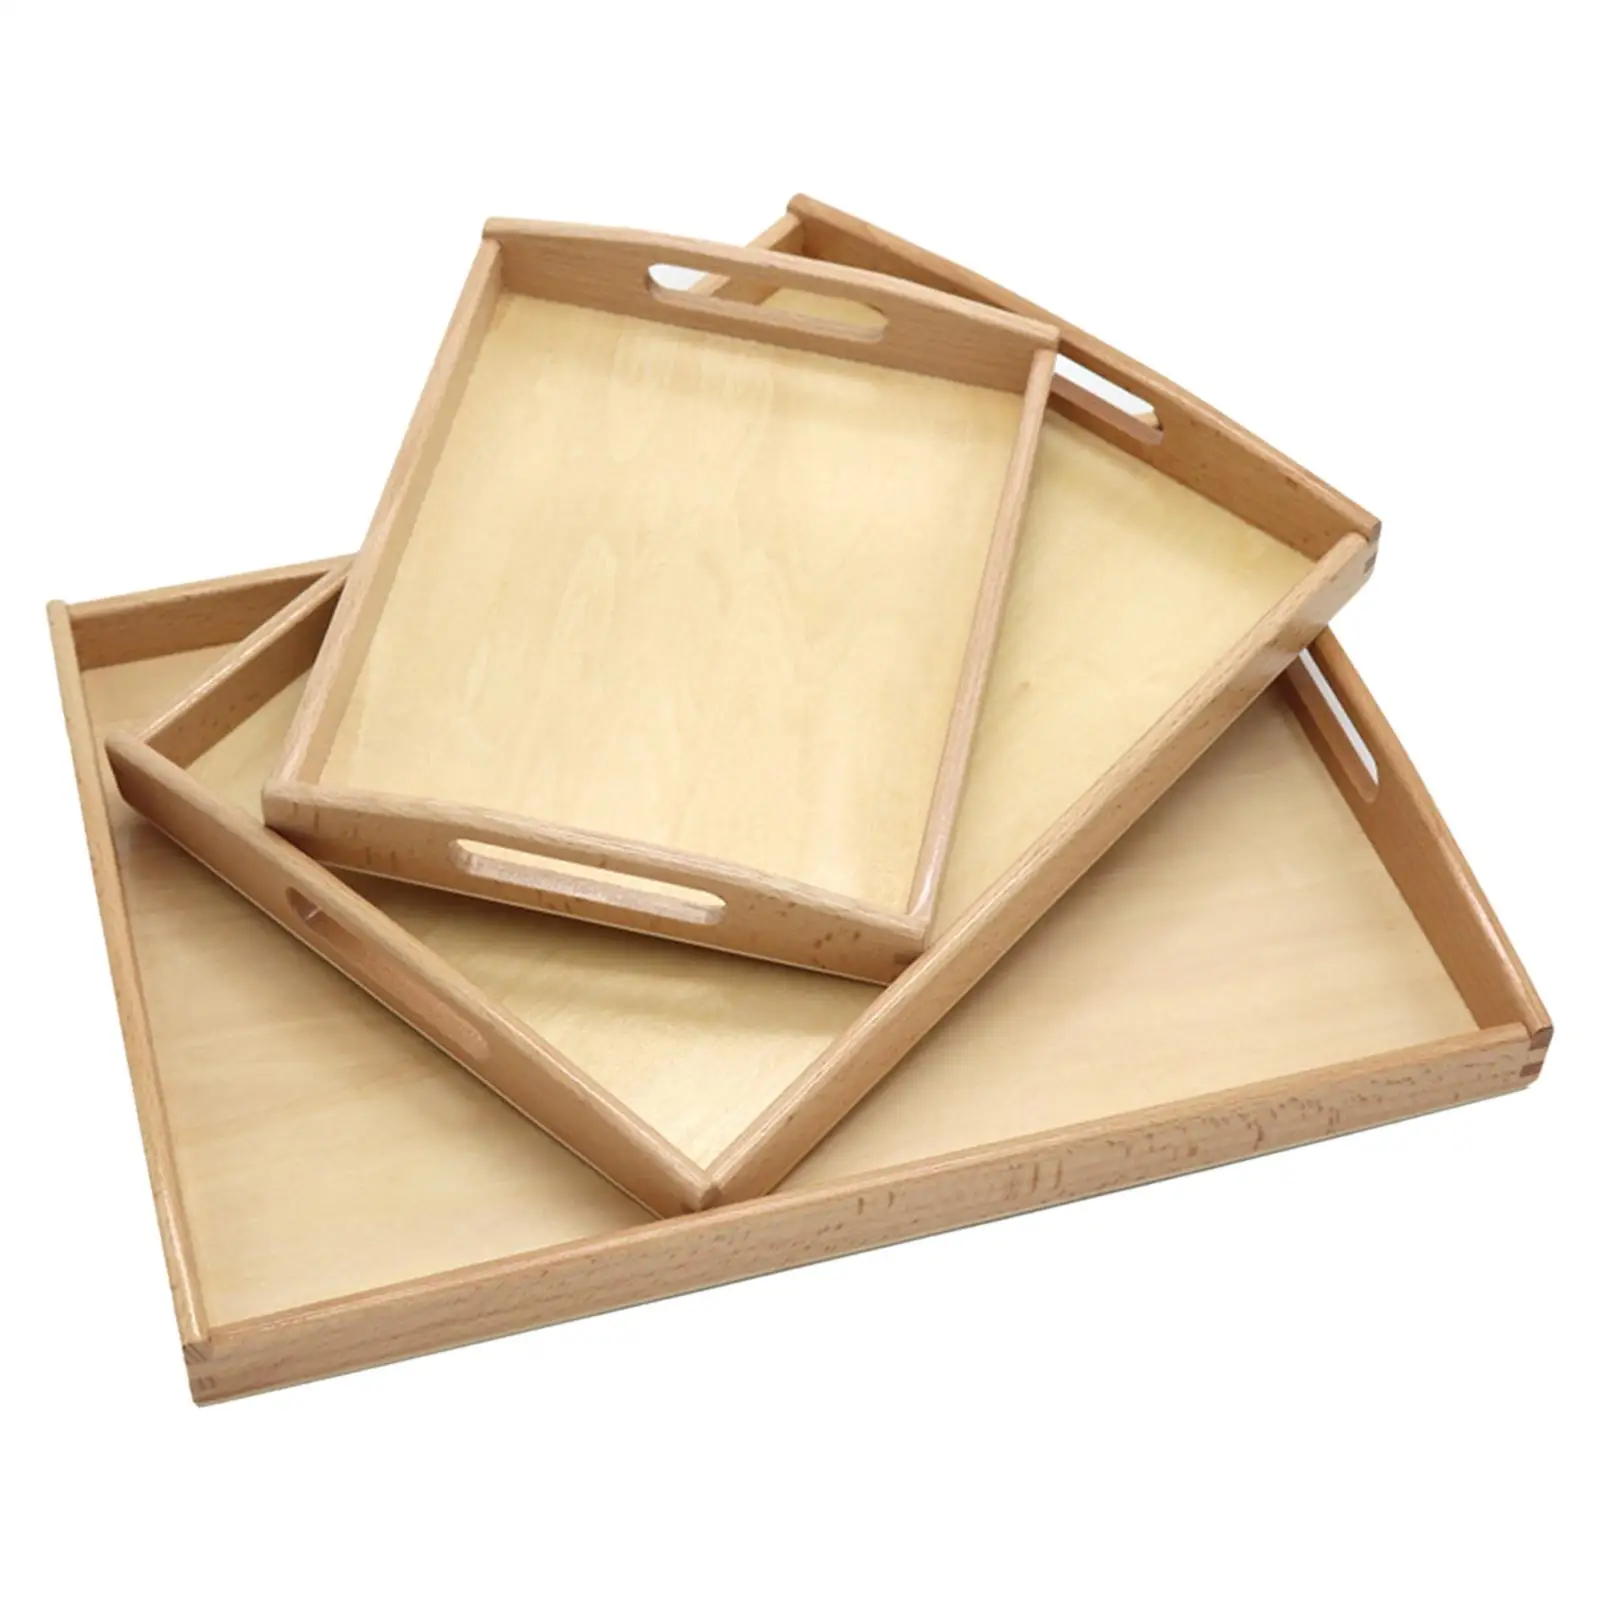 Montessori Wooden Tray Rectangular Shape Montessori Sand Tray Toy Display Light Durable Wood Serving Tray for Teaching Crafting